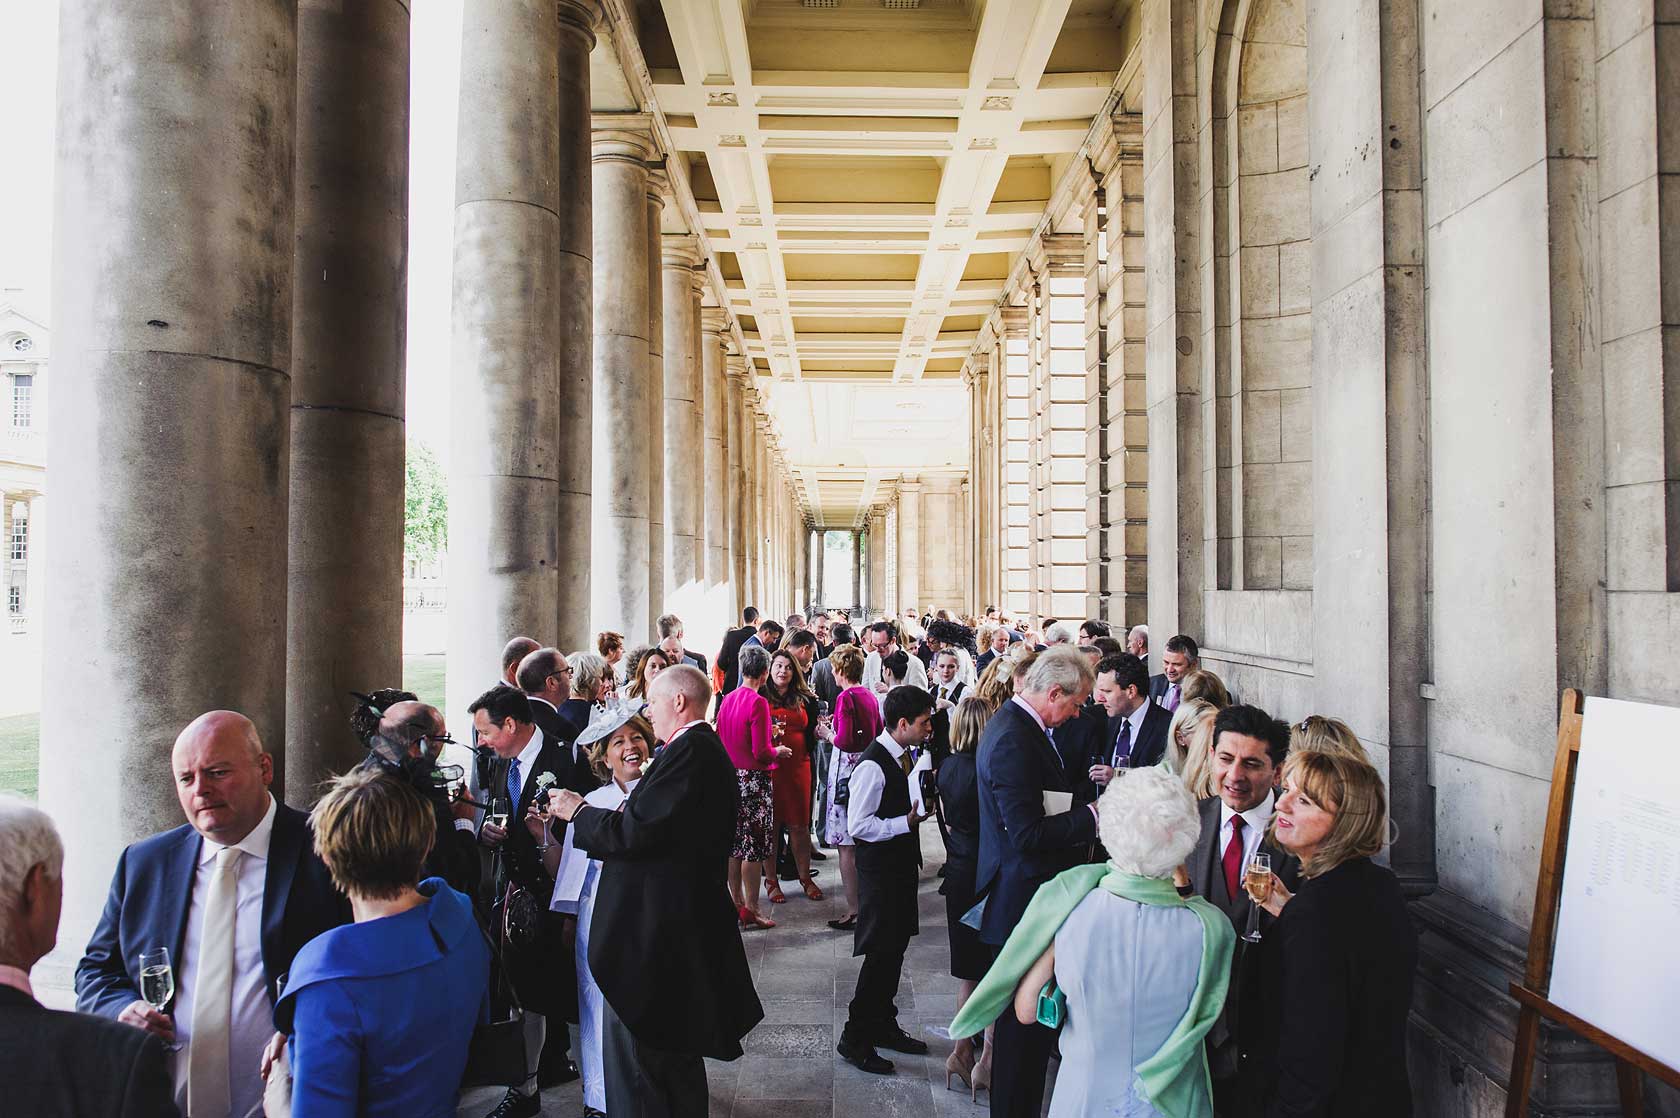 Reportage Wedding Photography at Old Royal Naval College